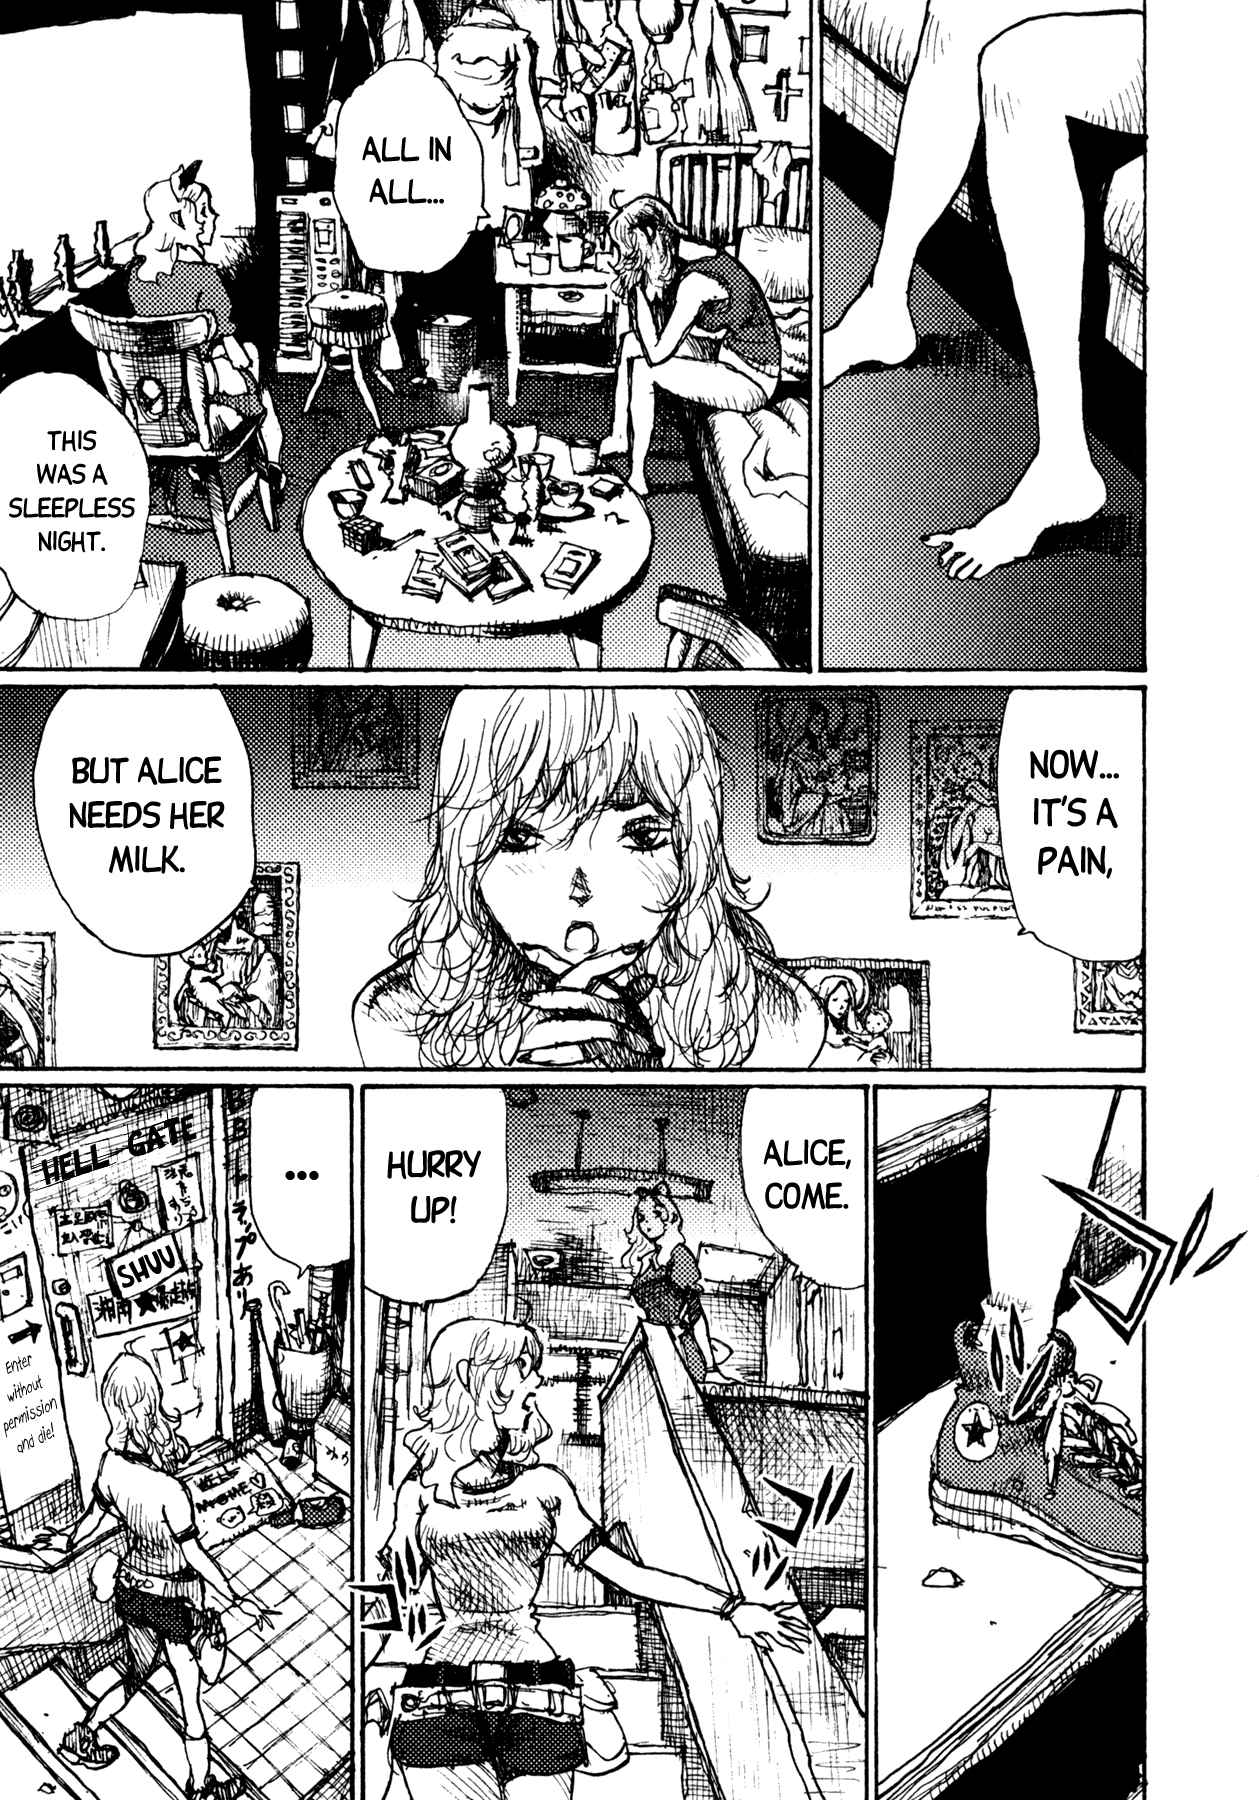 Alice from Hell Vol. 2 Ch. 15 Milk